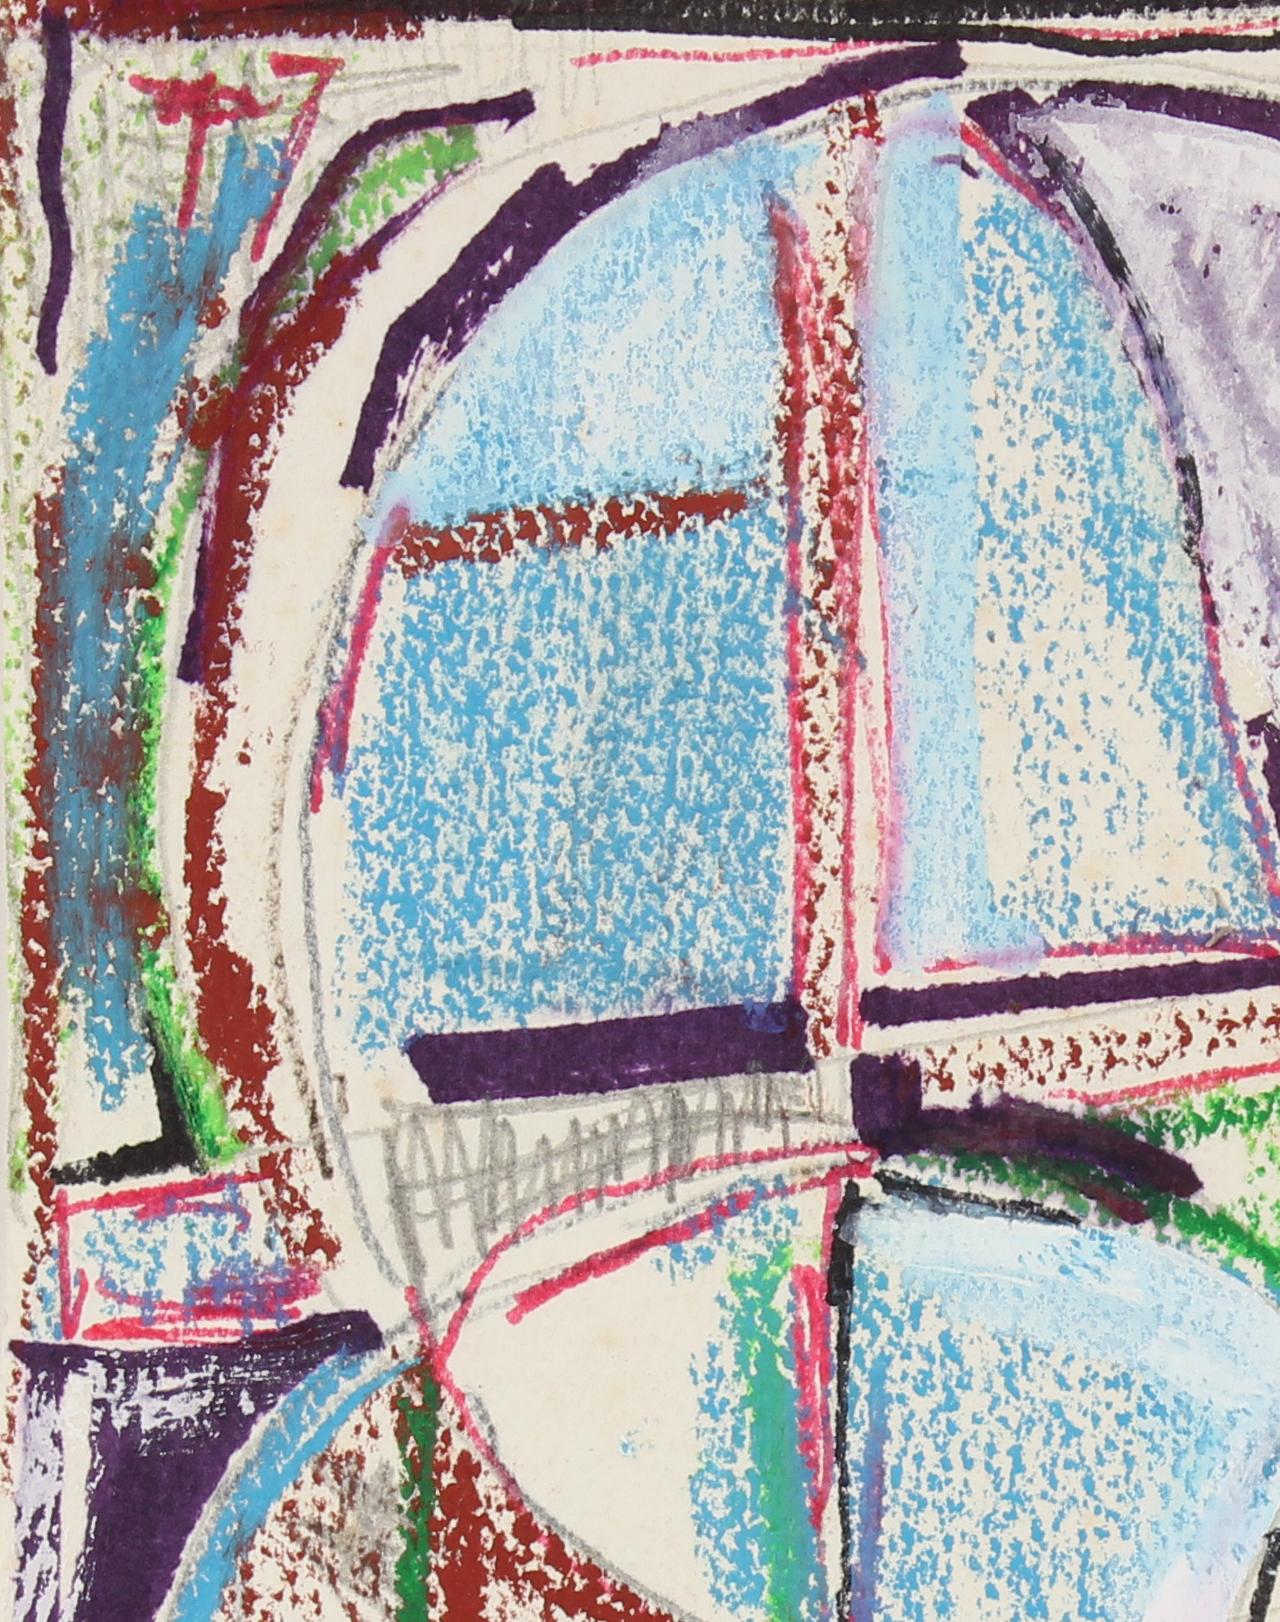 Modernist Colorful Abstract in Ink and Pastel with Red & Blue, Mid 20th Century - Gray Abstract Drawing by Paul McCoy